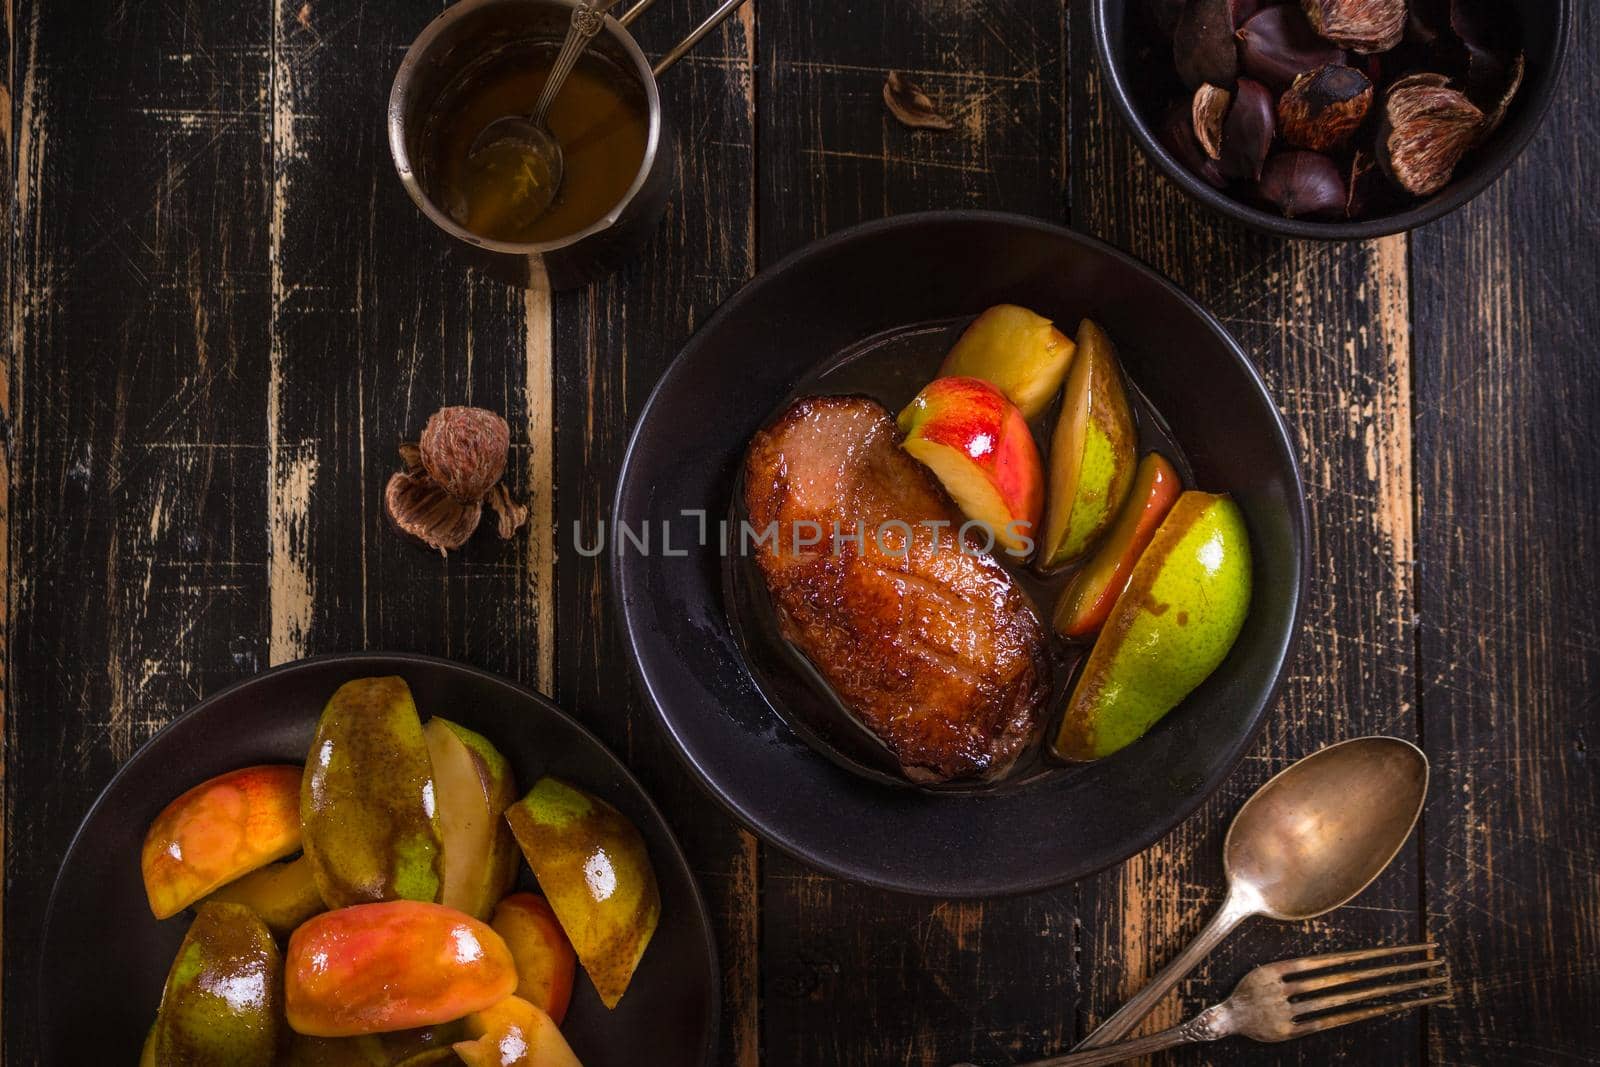 Roasted duck breast with golden crispy skin served with baked apples and chestnuts. Served on a ceramic black plate over rustic dark wooden table. Top view